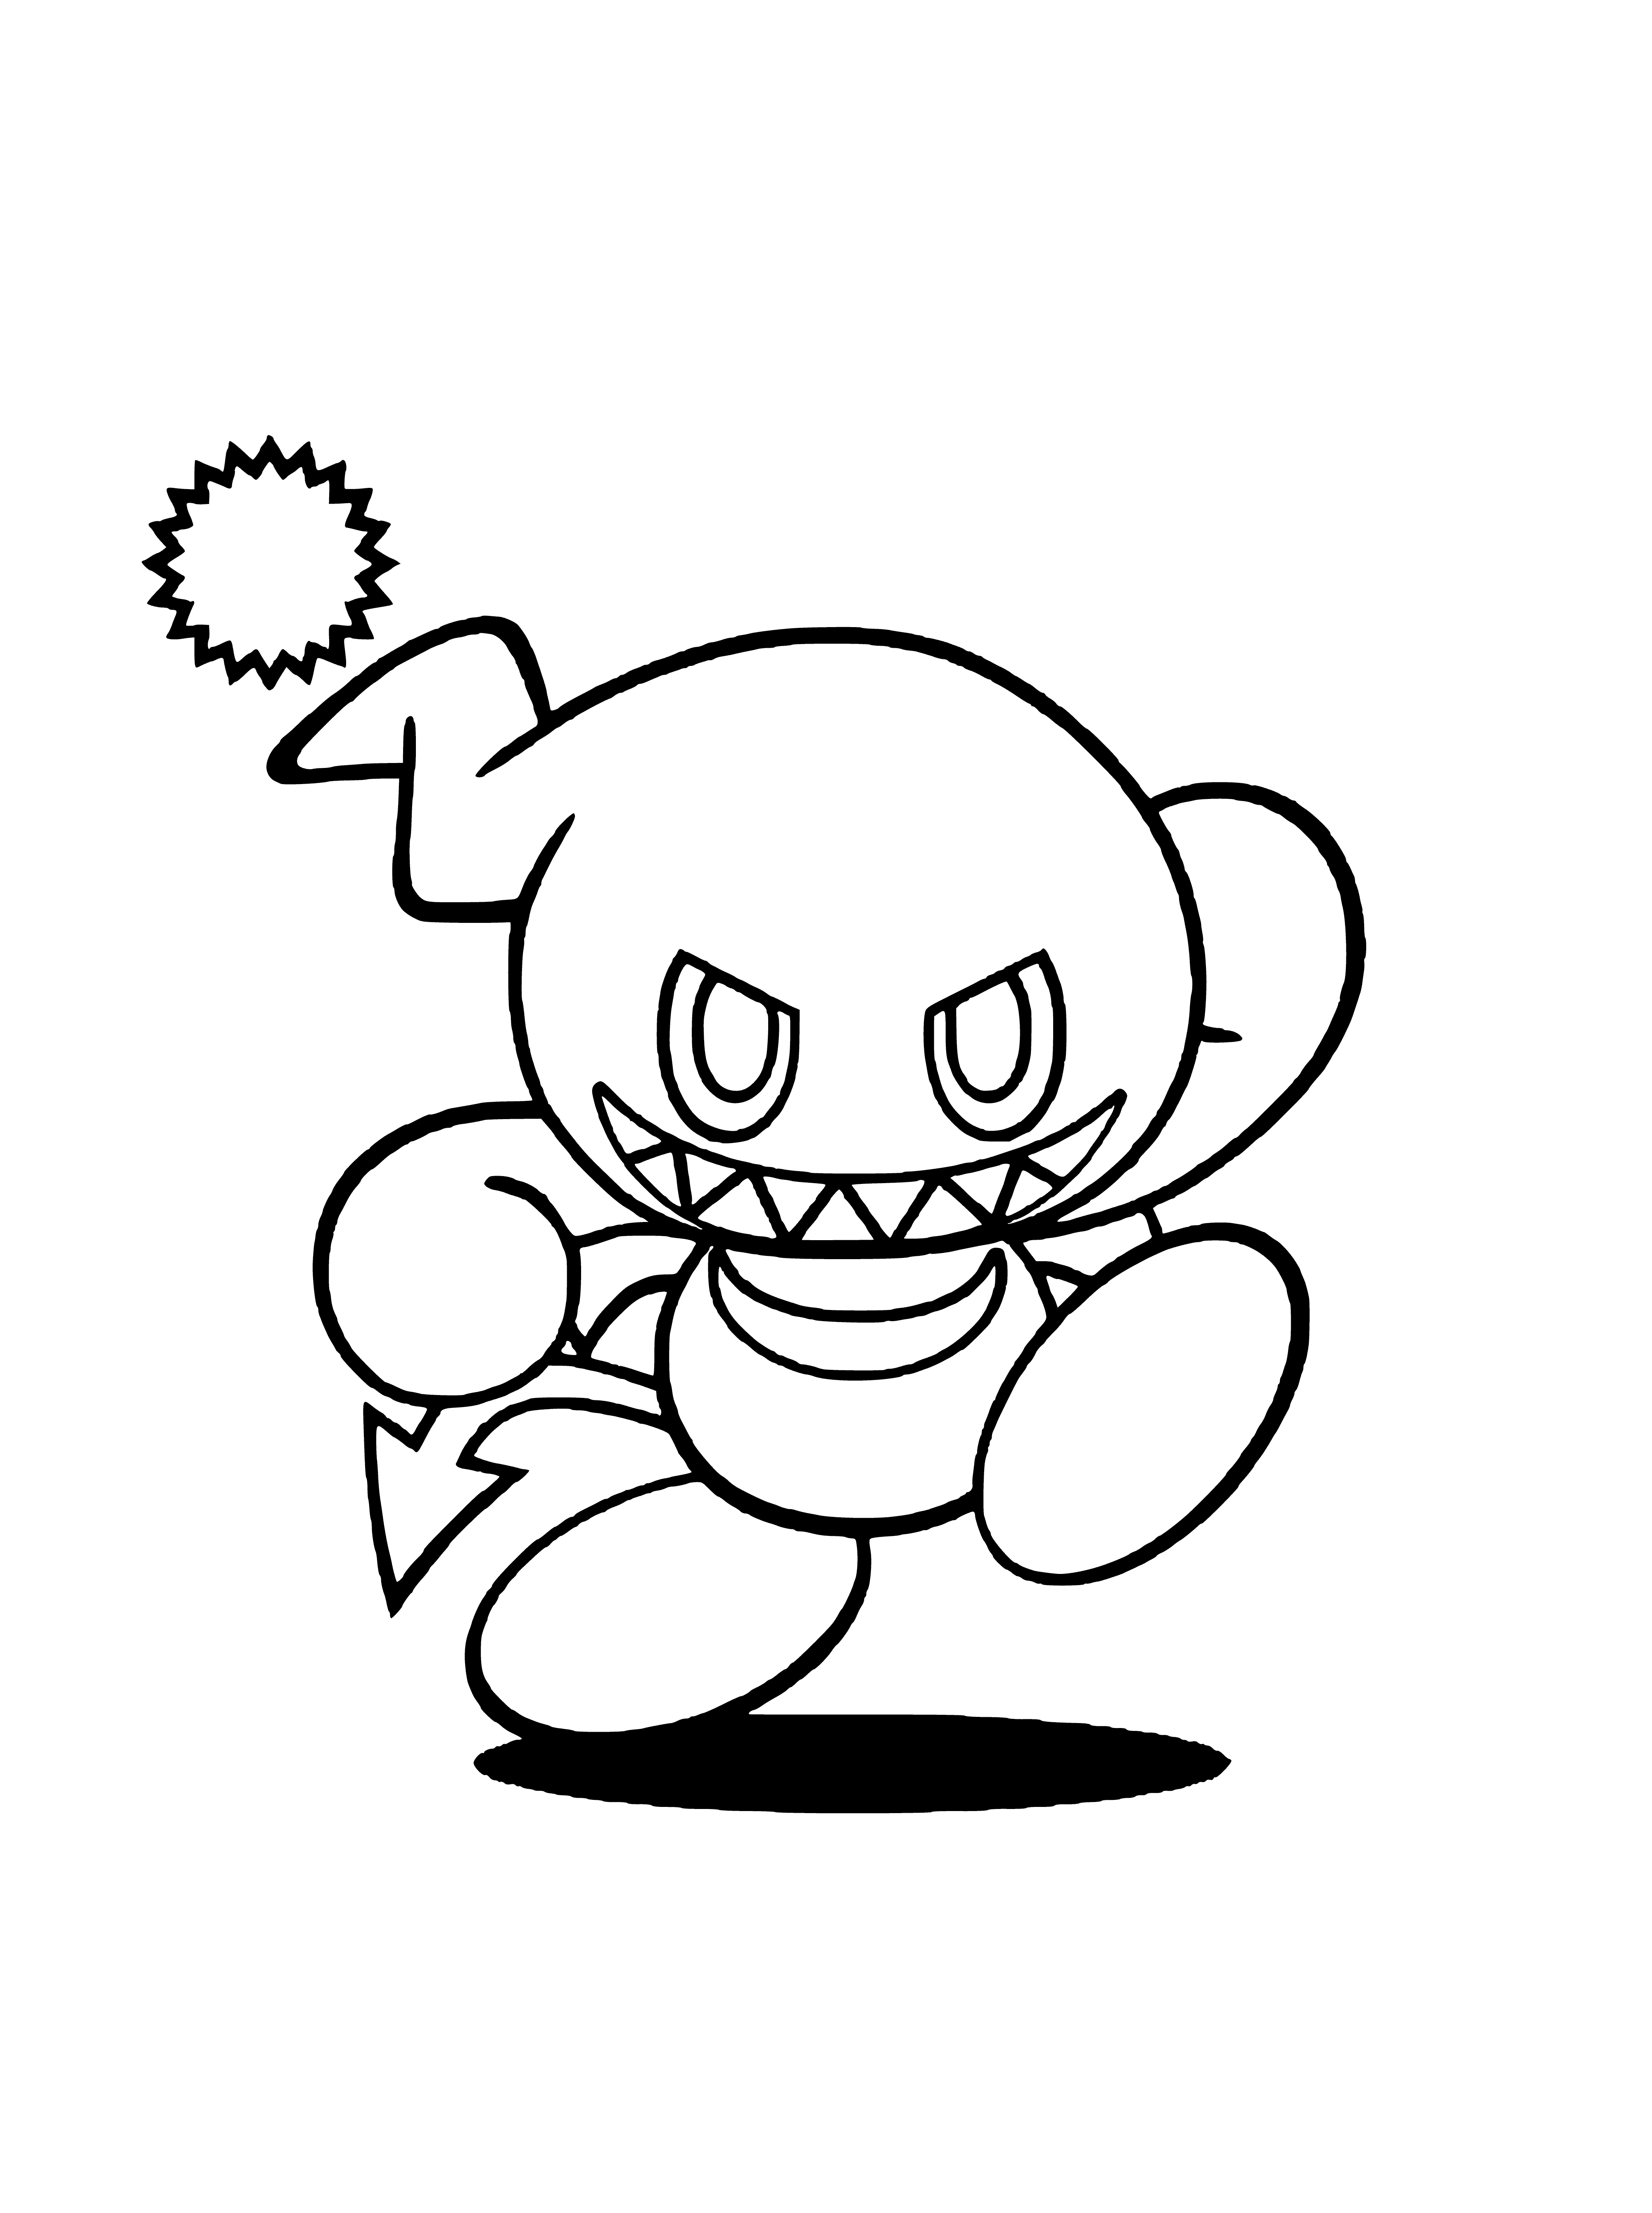 coloring page: A black-and-white chao with red eyes, spikes, and a devil-like tail on a coloring page.